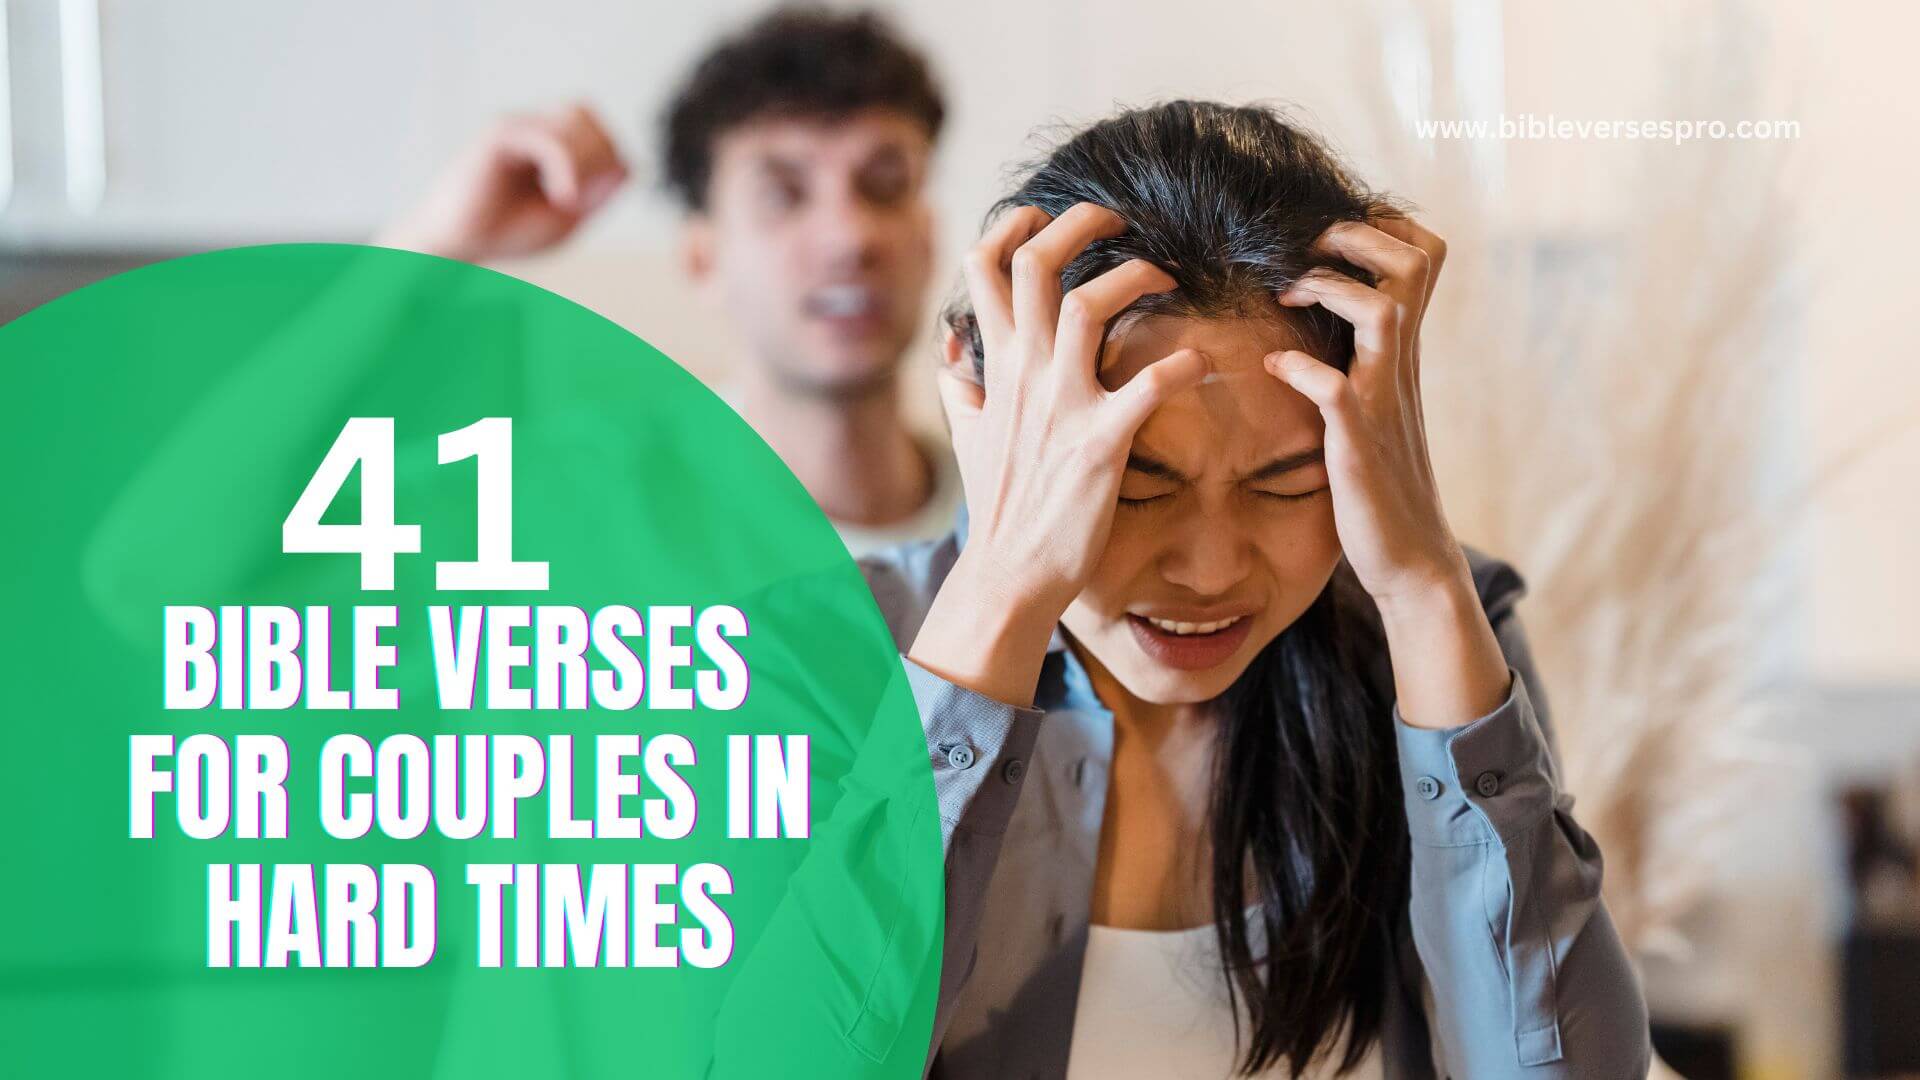 BIBLE VERSES FOR COUPLES IN HARD TIMES